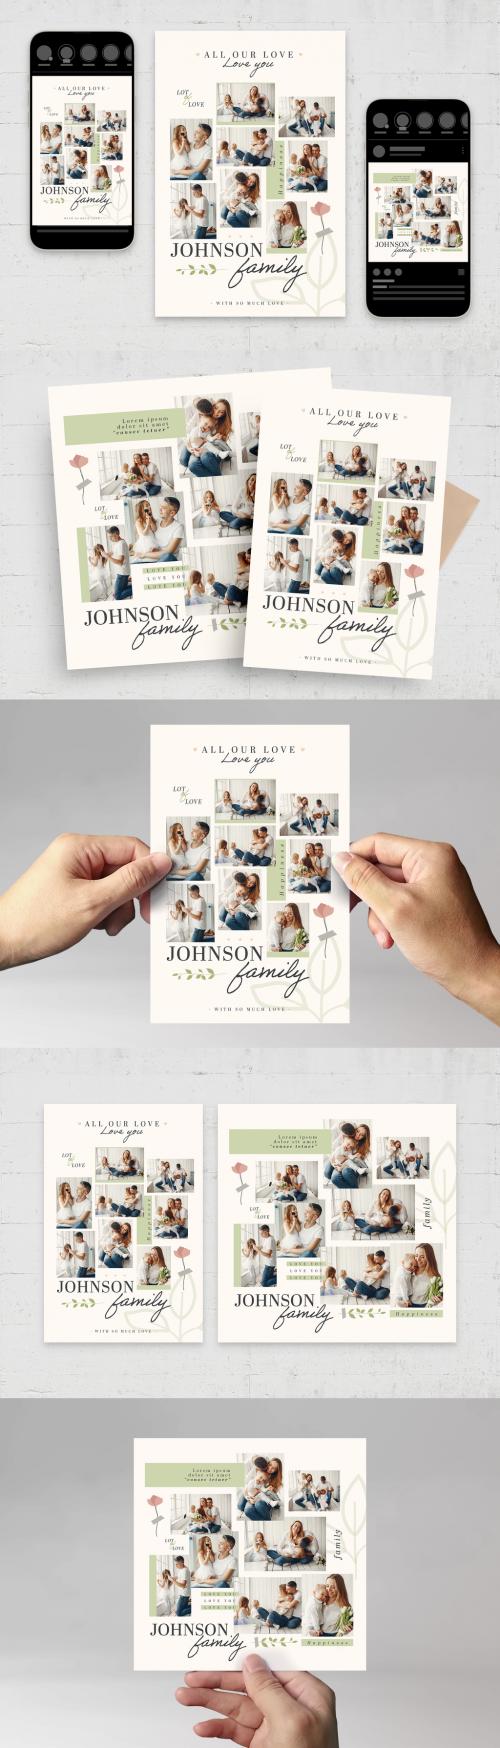 Family Photo Collage Layout with Elegant Floral Illustrations